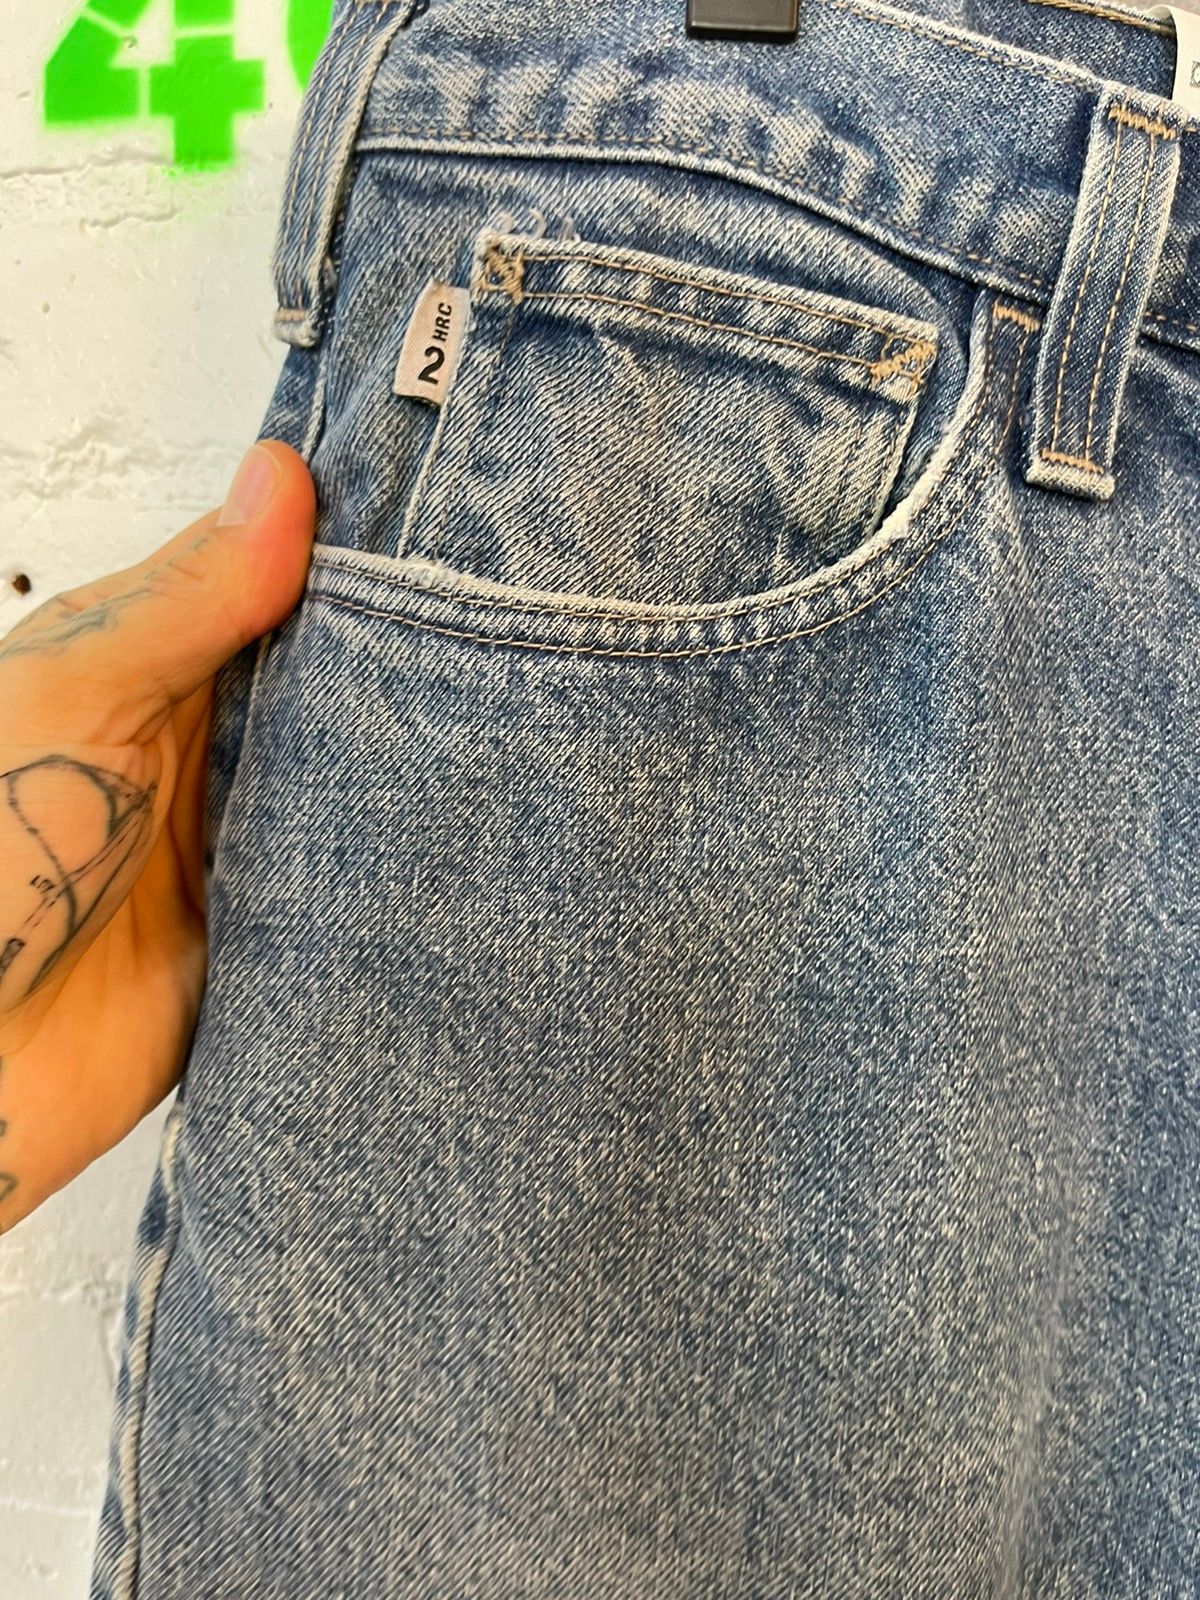 Vintage 90s Faded Carhartt Baggy blue jeans 32-36